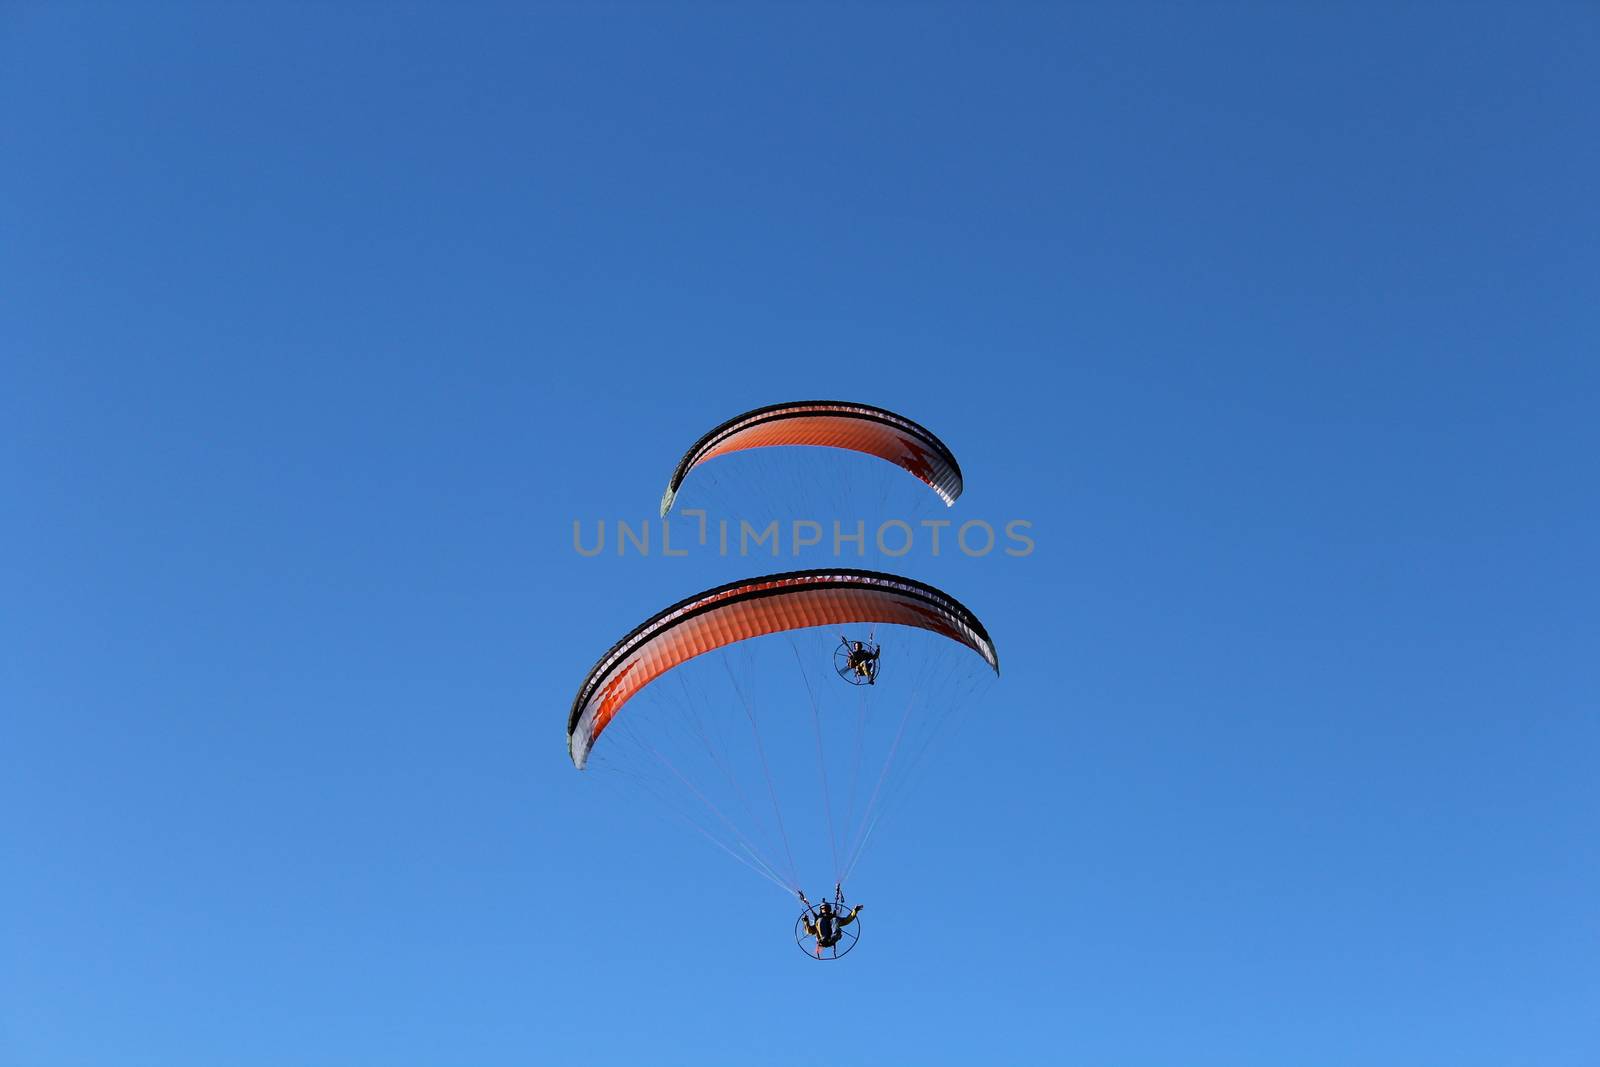 Some pilots, paragliders, make the spectacular perform